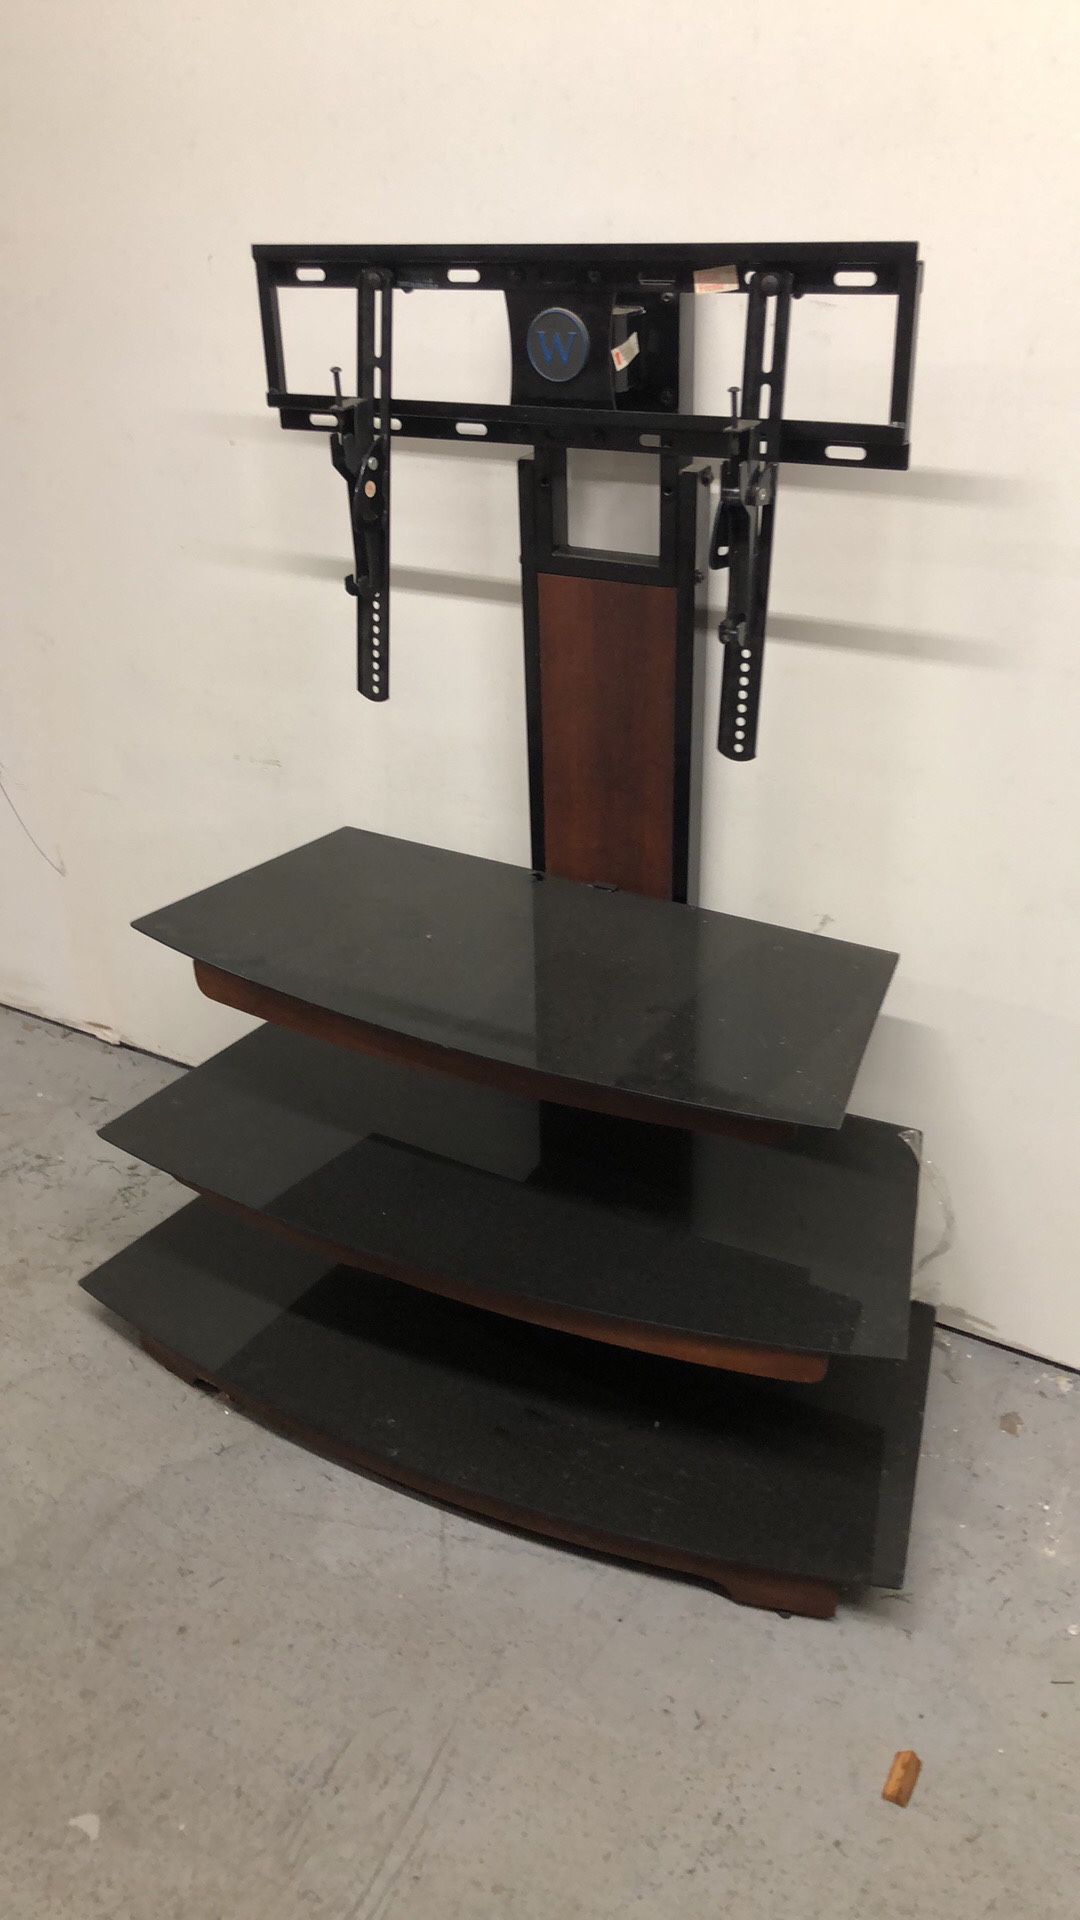 Good condition TV stand